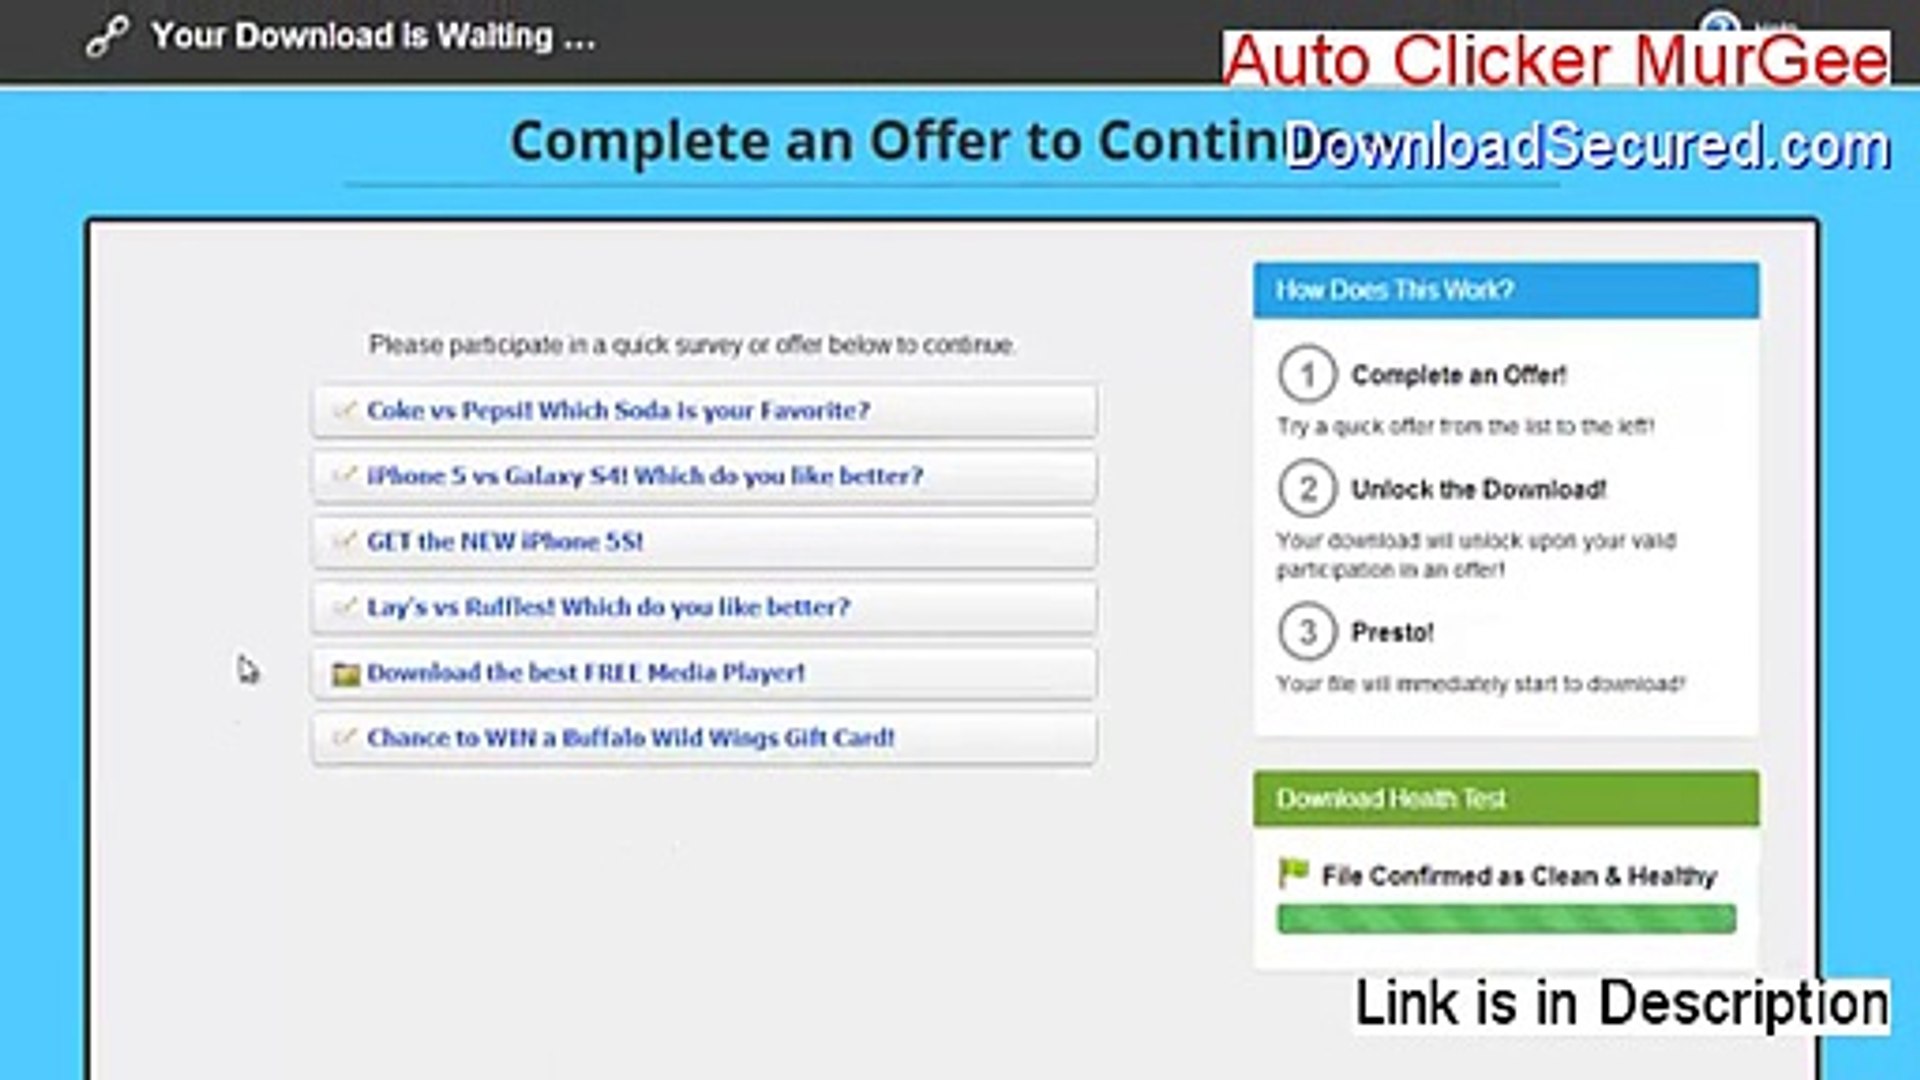 Auto Clicker Murgee Full Instant Download Video Dailymotion